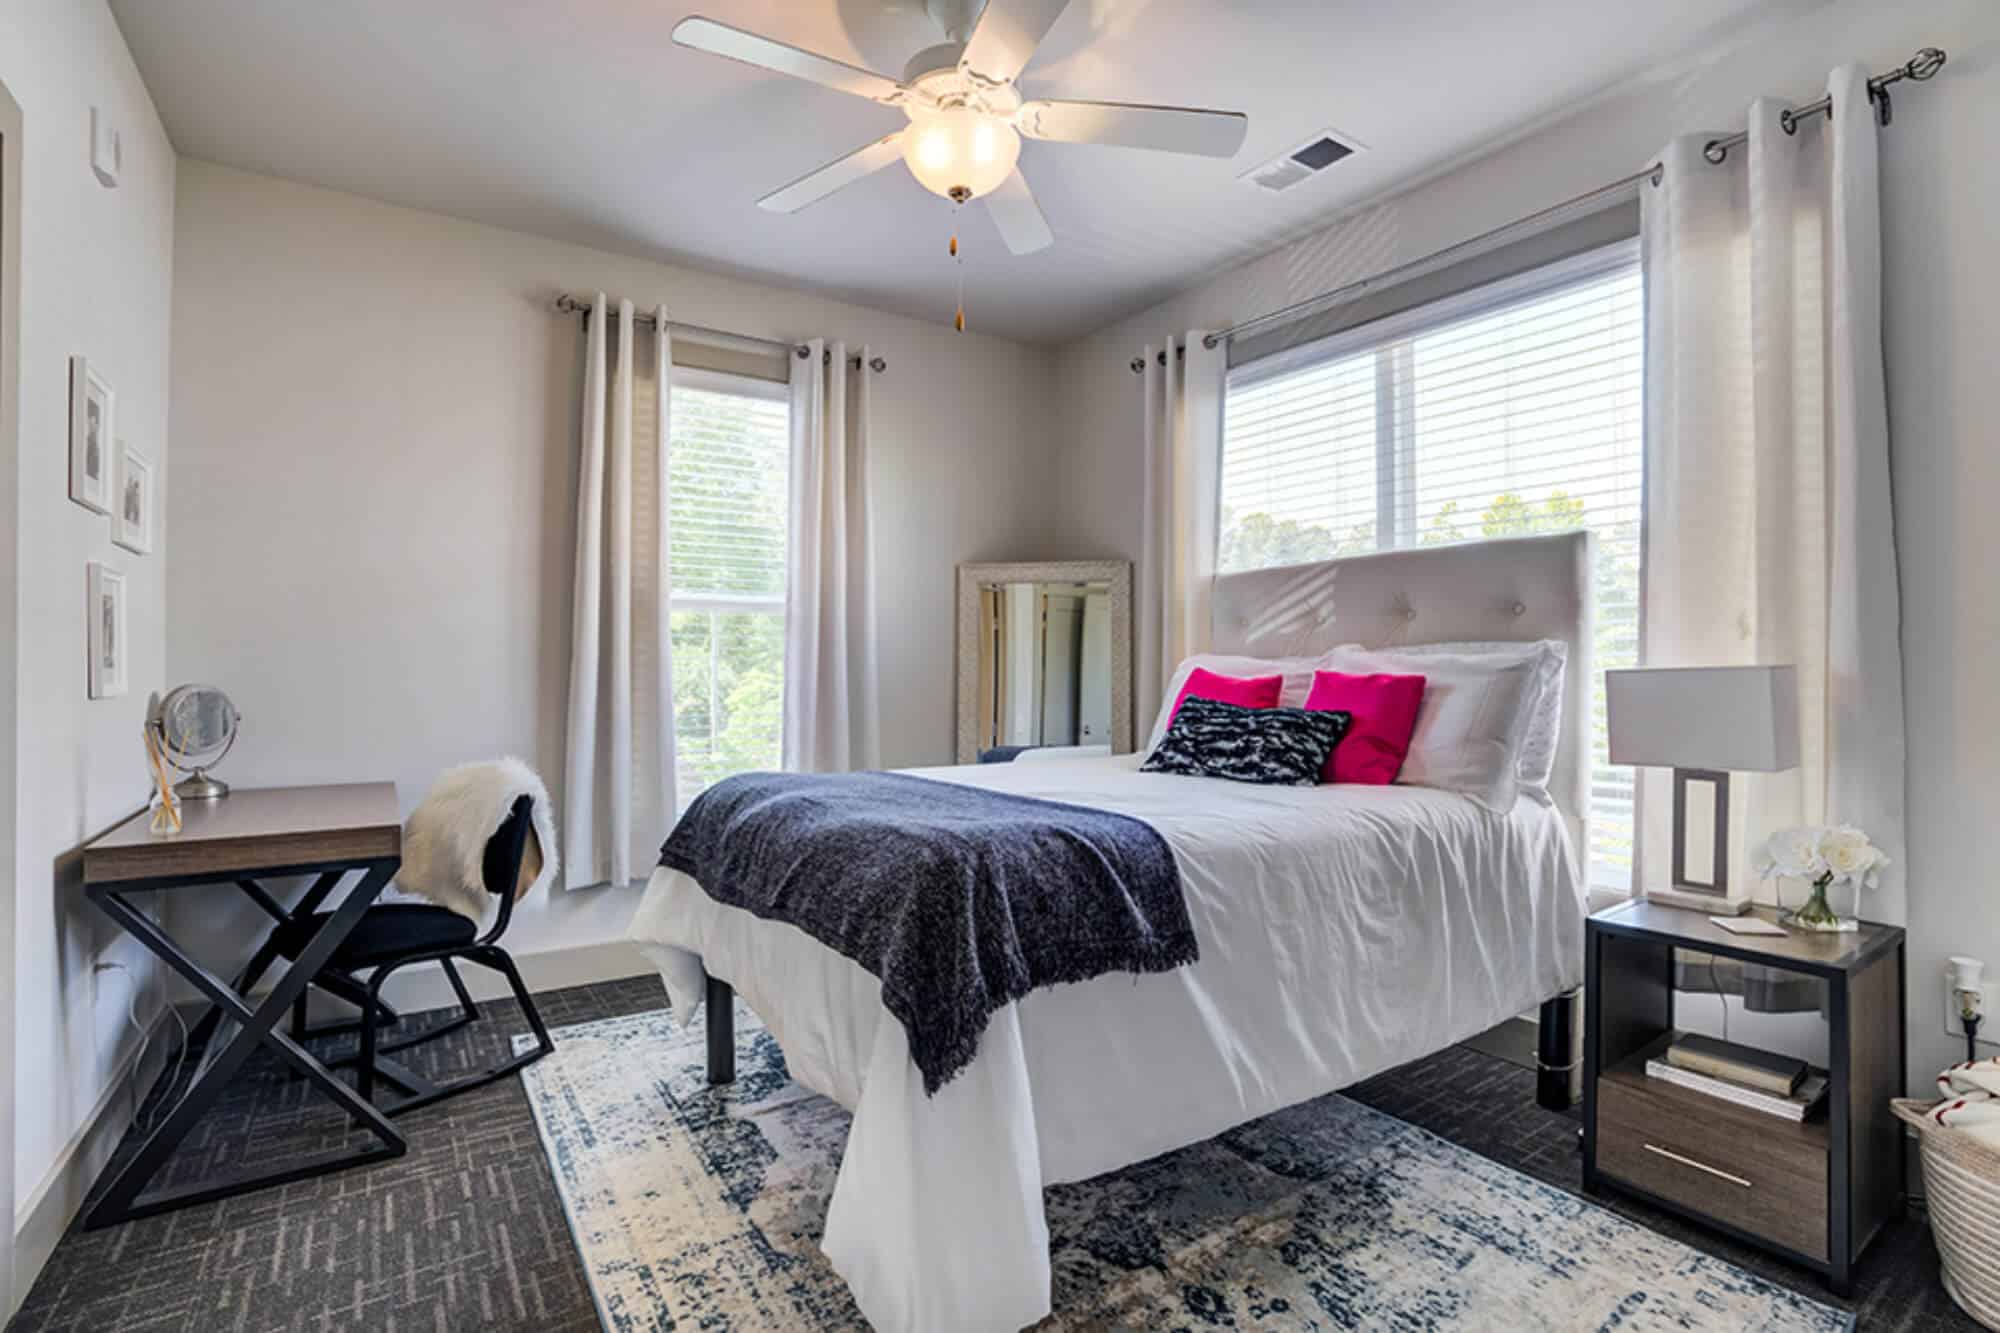 centennial luxury off campus apartments near north carolina state university funished private bedrooms